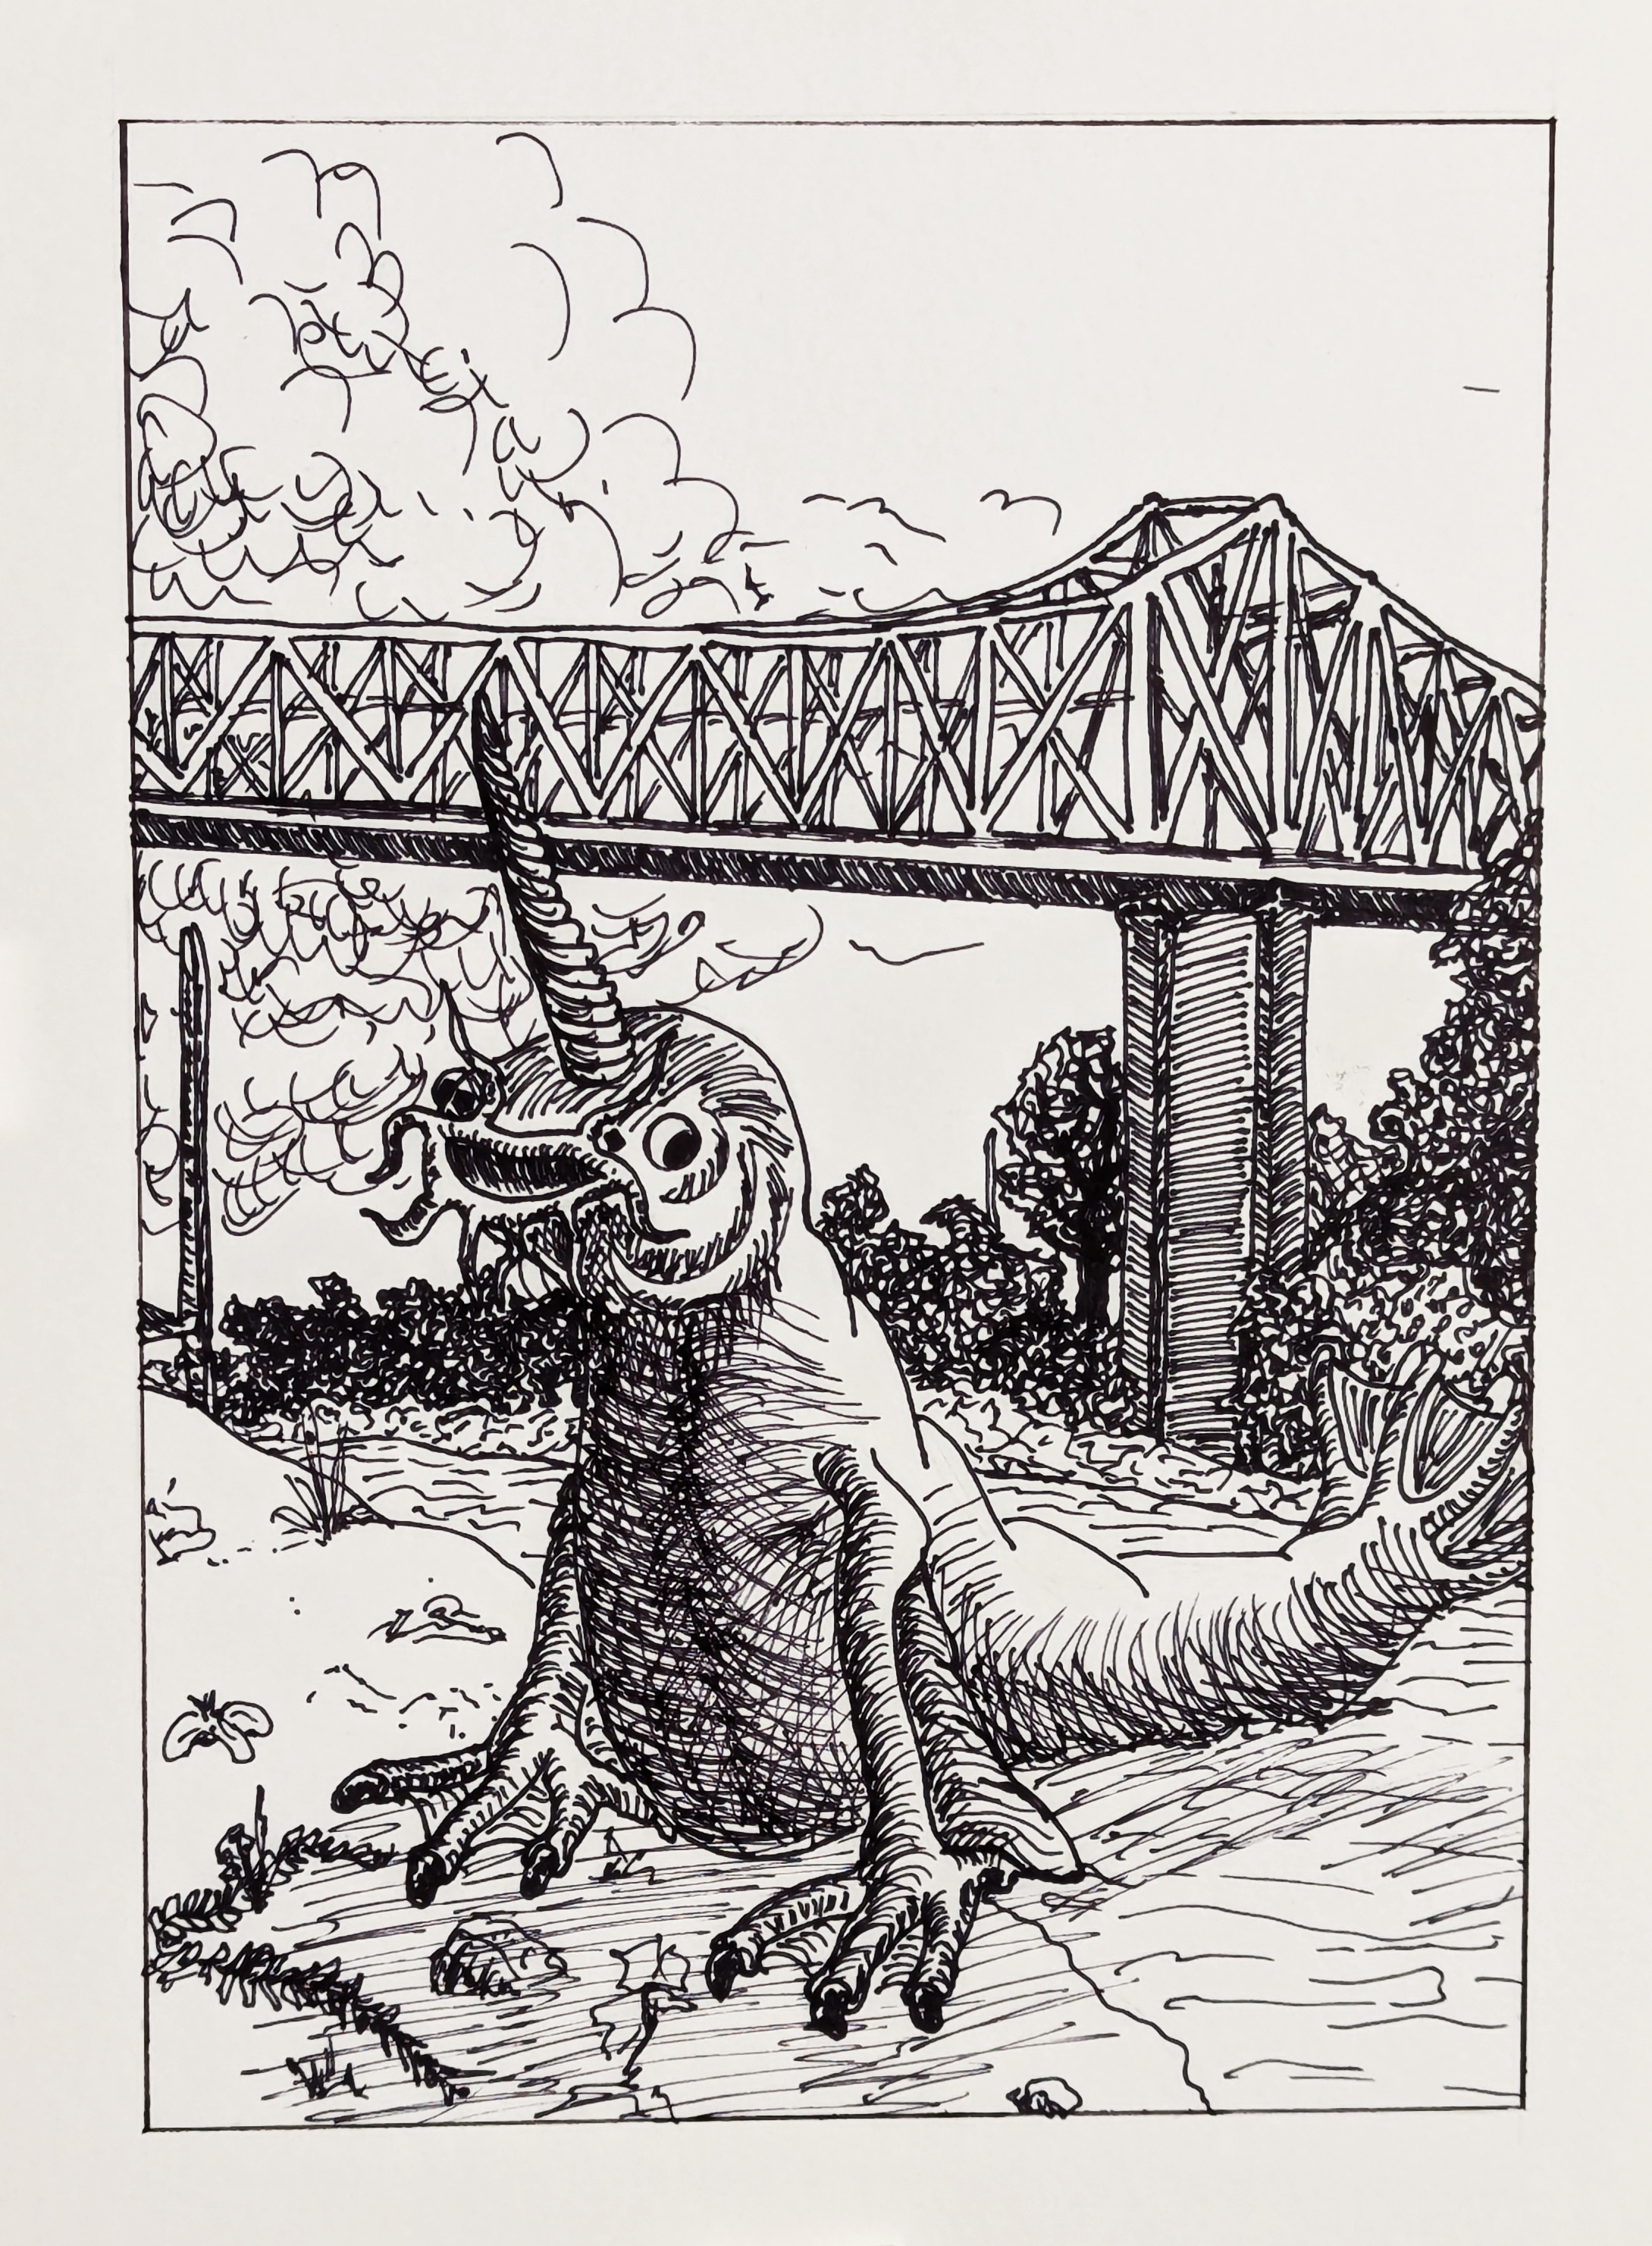 White River Monster based off of an amalgamation of eyewitness accounts in front of historic Newport Bridge